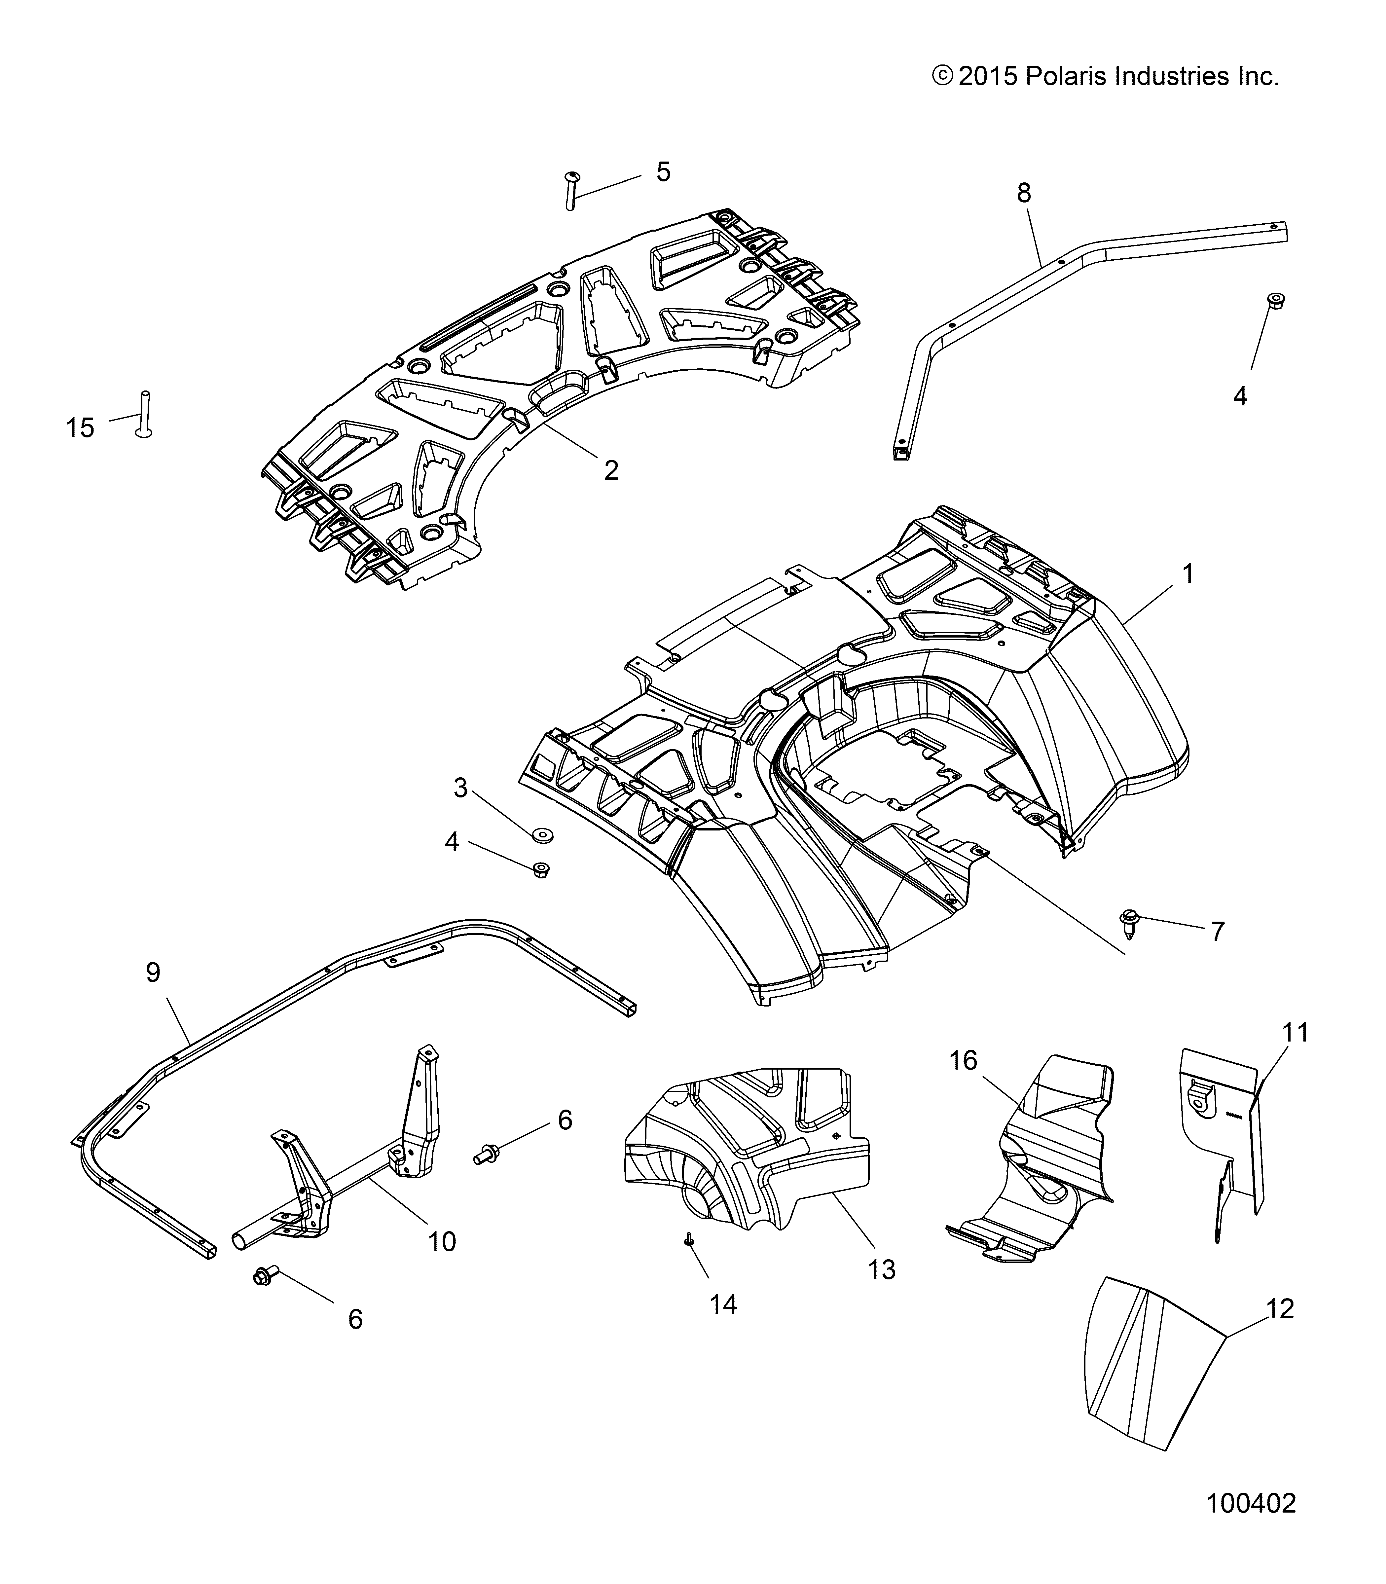 Part Number : 5260610 FOOTWELL HEAT SHIELD